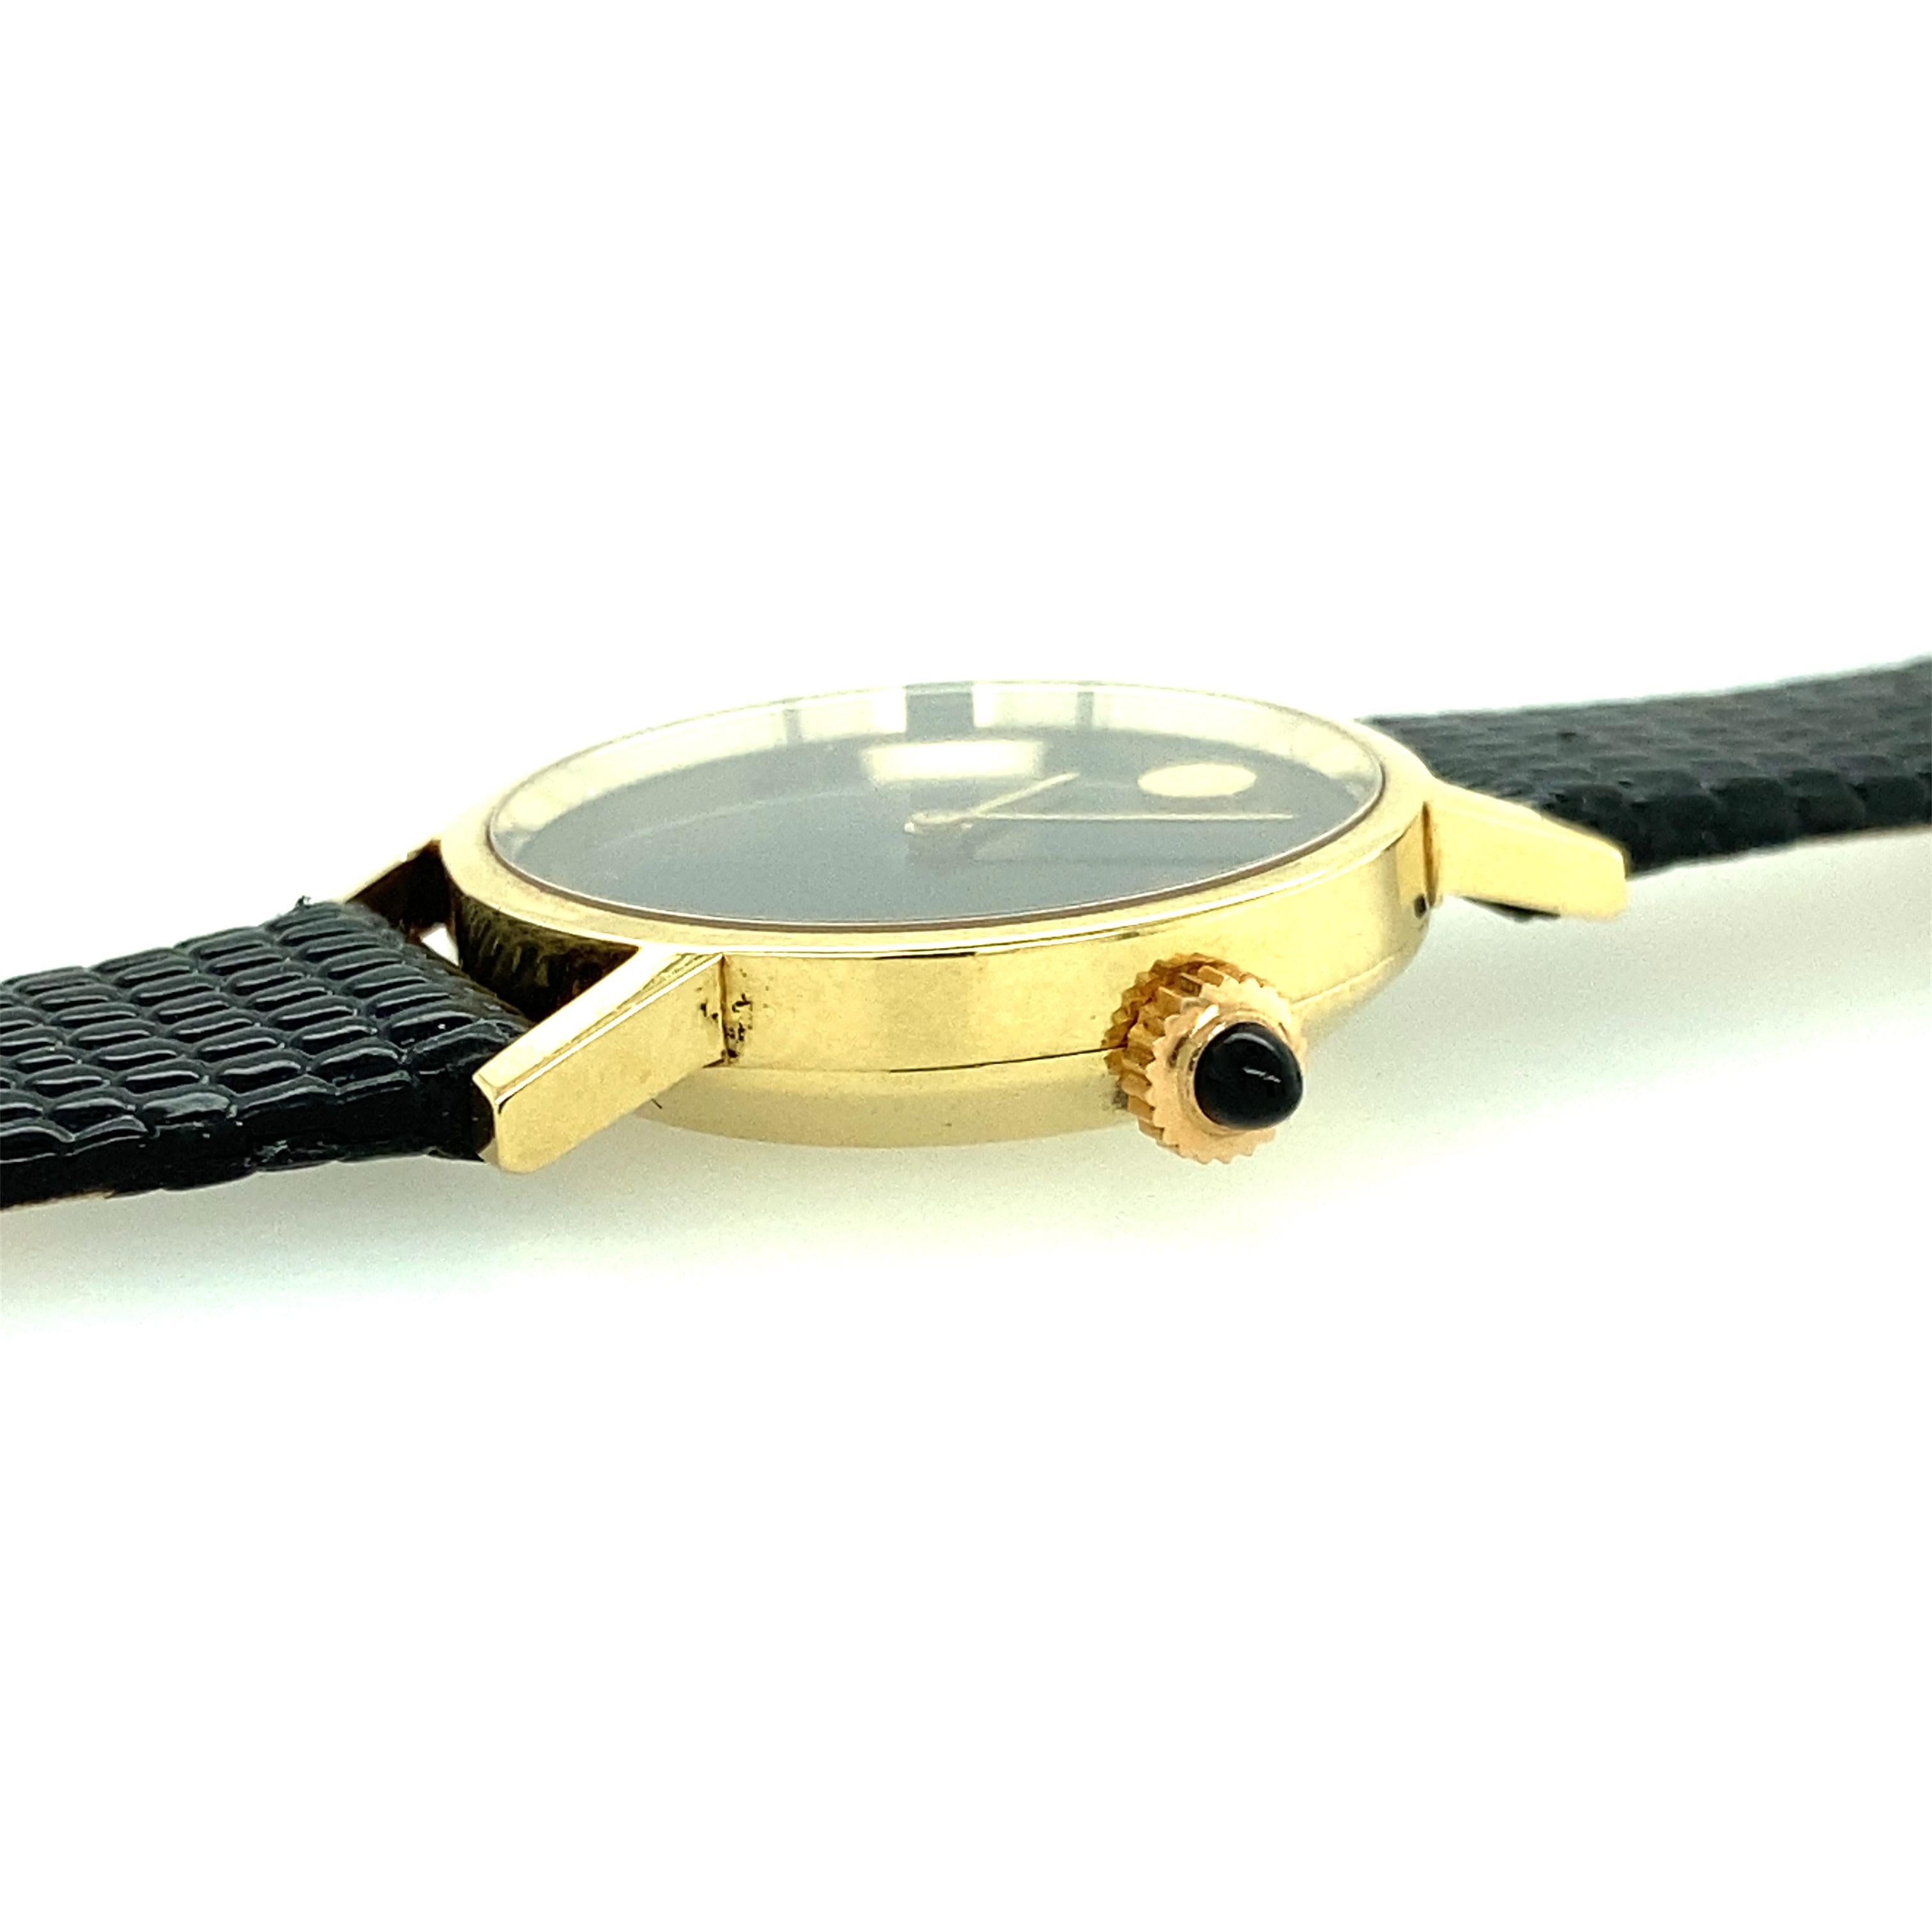 One 14 karat yellow gold Movado watch with Zenith movement. The watch measures 24.30mm in diameter and eight inches long. The genuine leather strap measures 12mm neat the face of the watch and tapers to 9.61mm towards the end of the strap.  